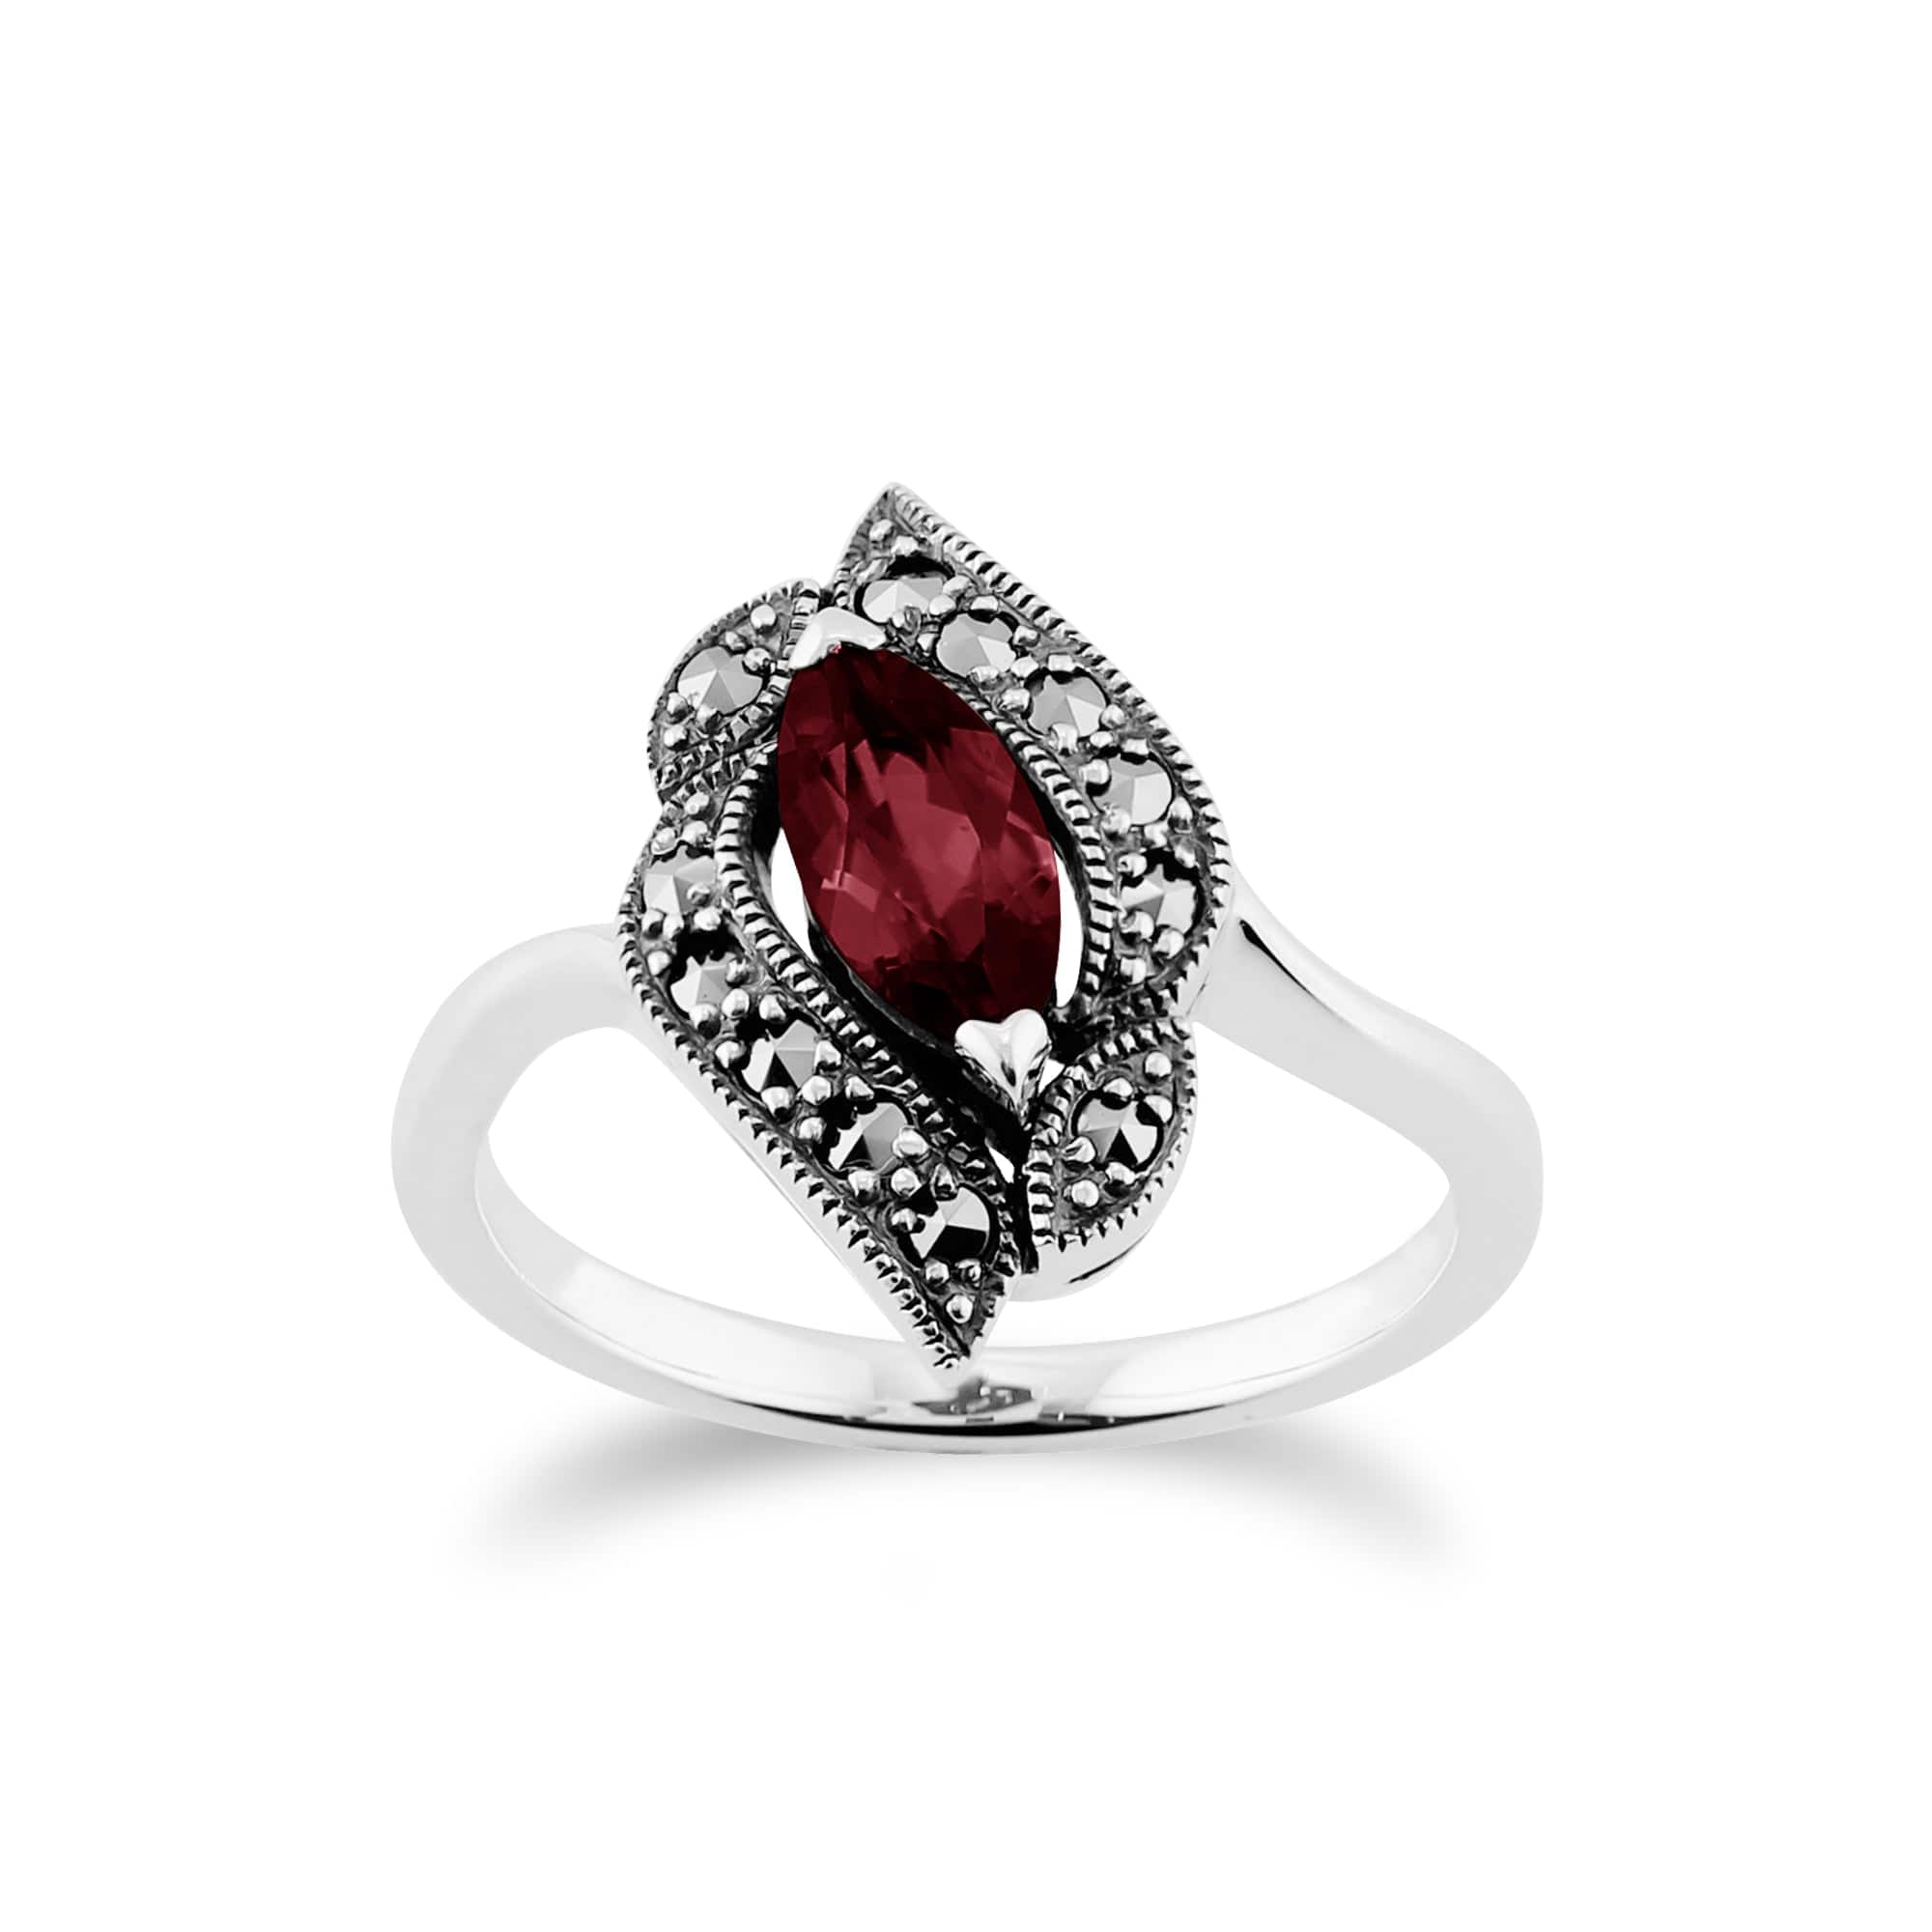 Art Nouveau Style Marquise Garnet & Marcasite Ring in 925 Sterling Silver - Gemondo